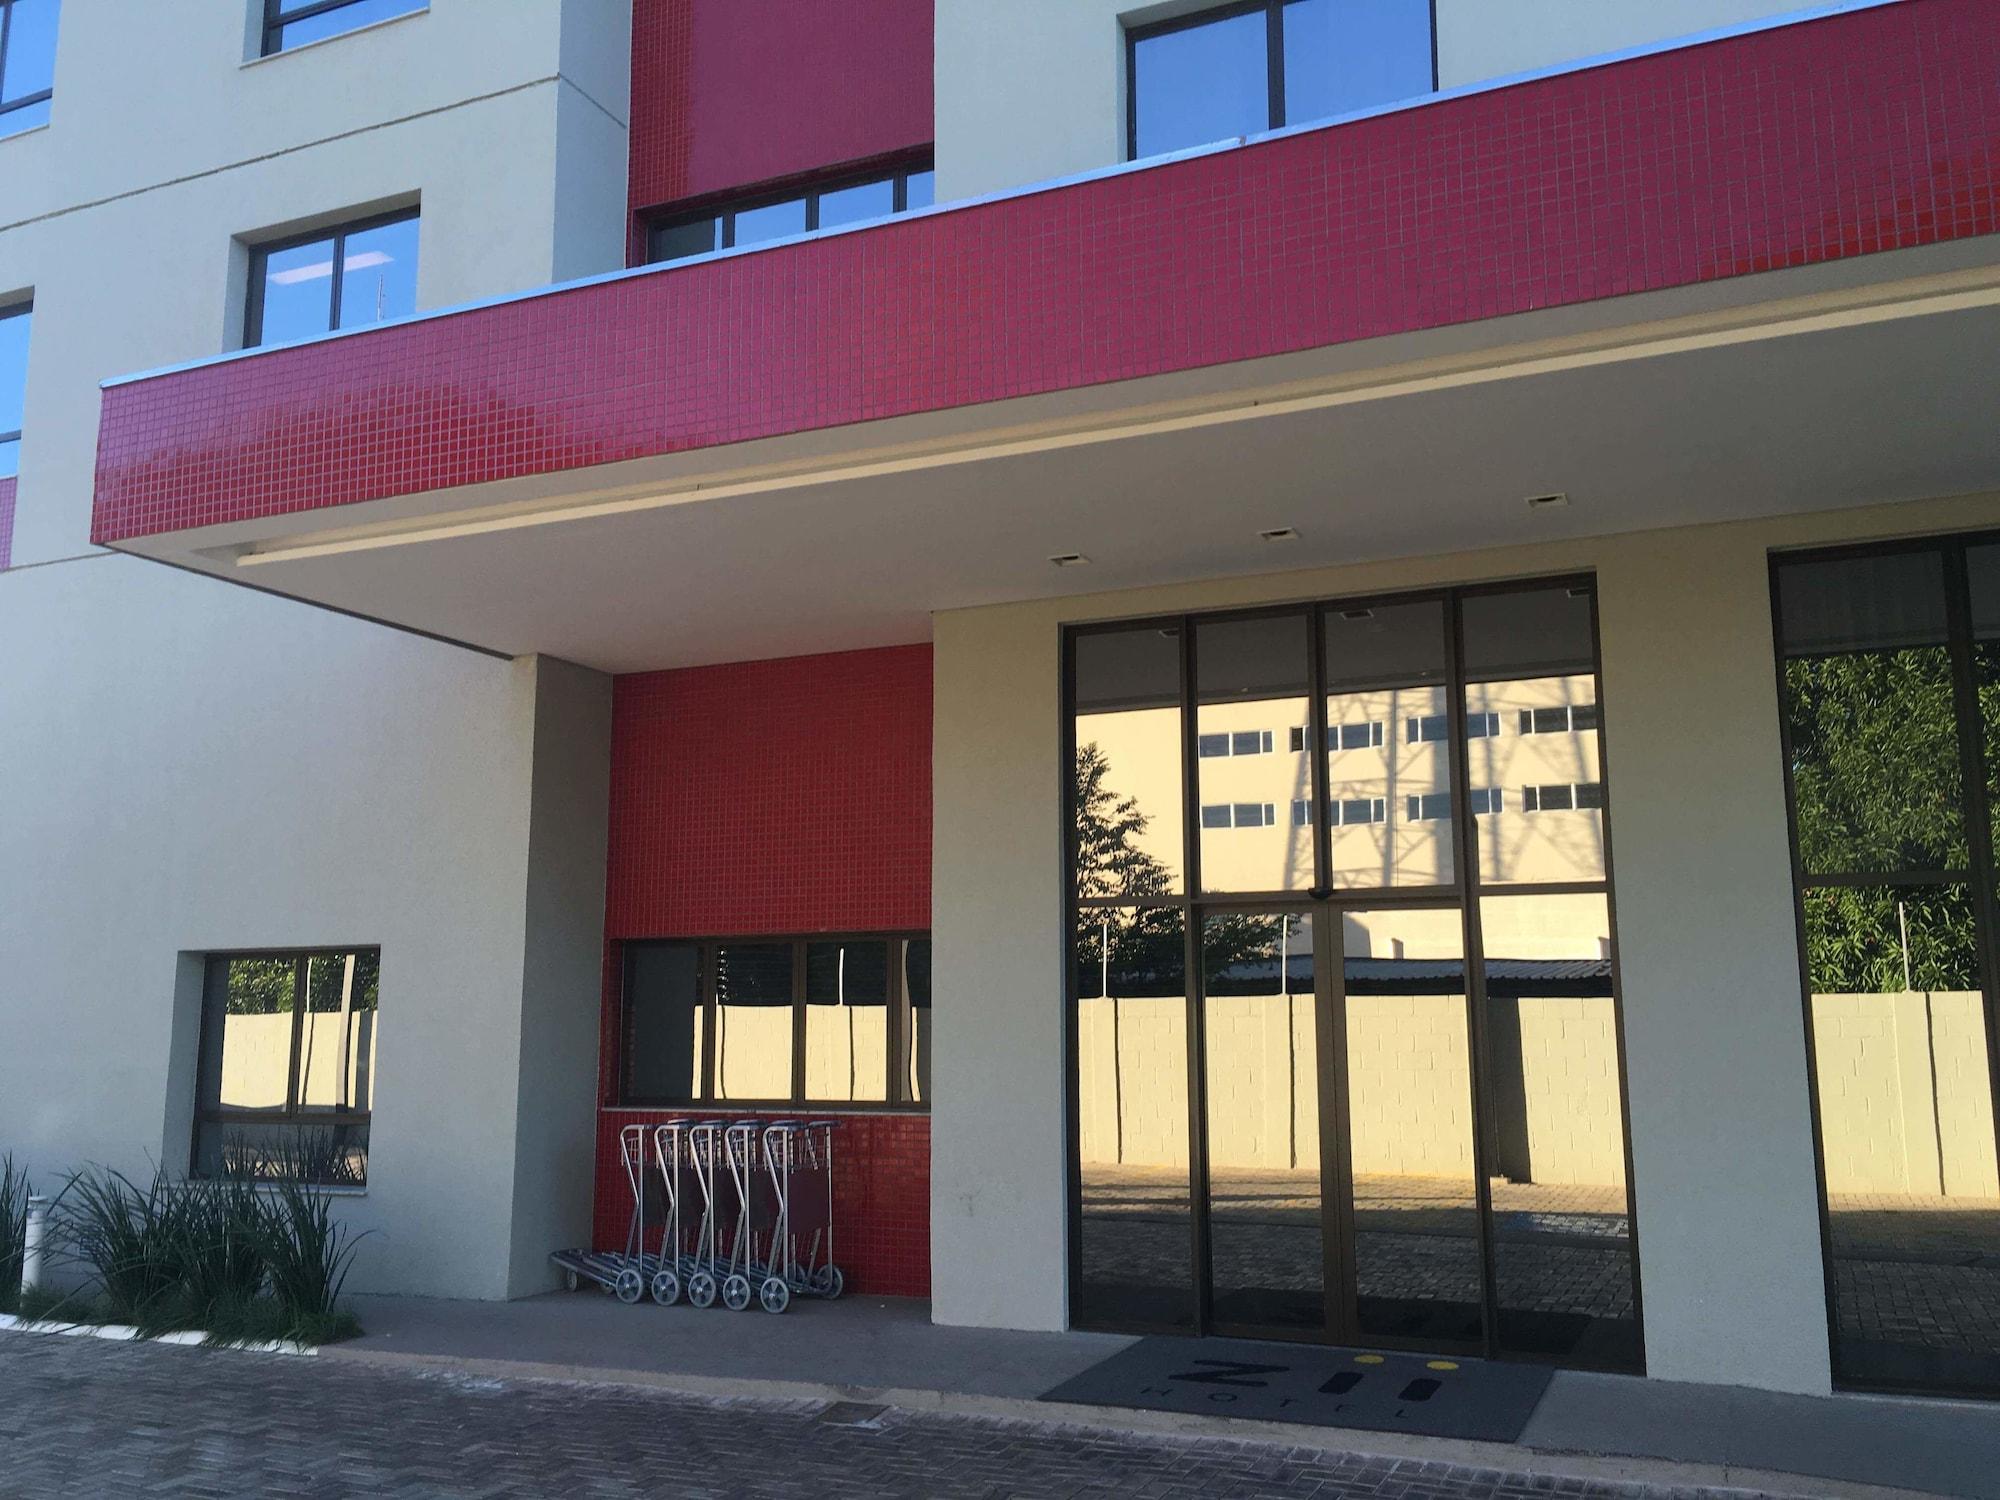 Ibis Styles Palmas (Adults Only) Hotel Exterior foto